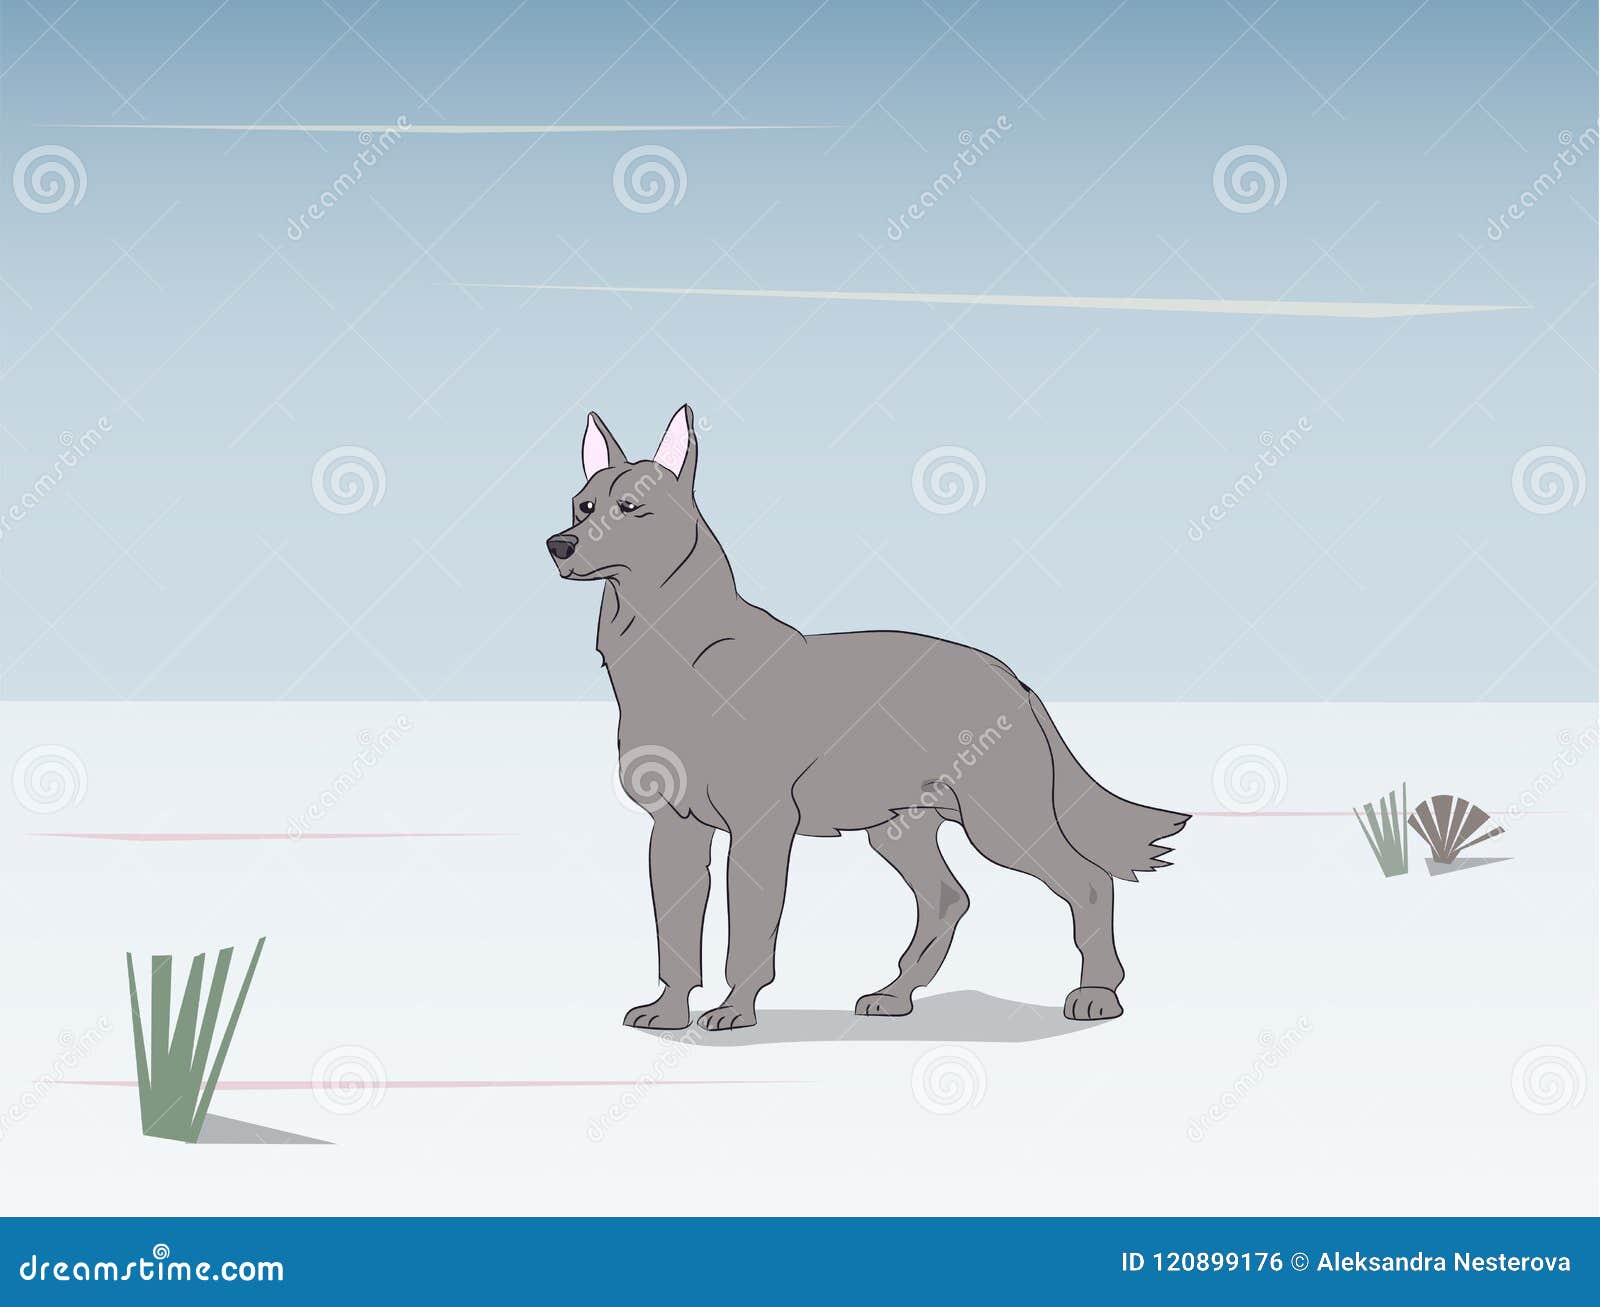 Wolf on nature background stock vector. Illustration of grey - 120899176